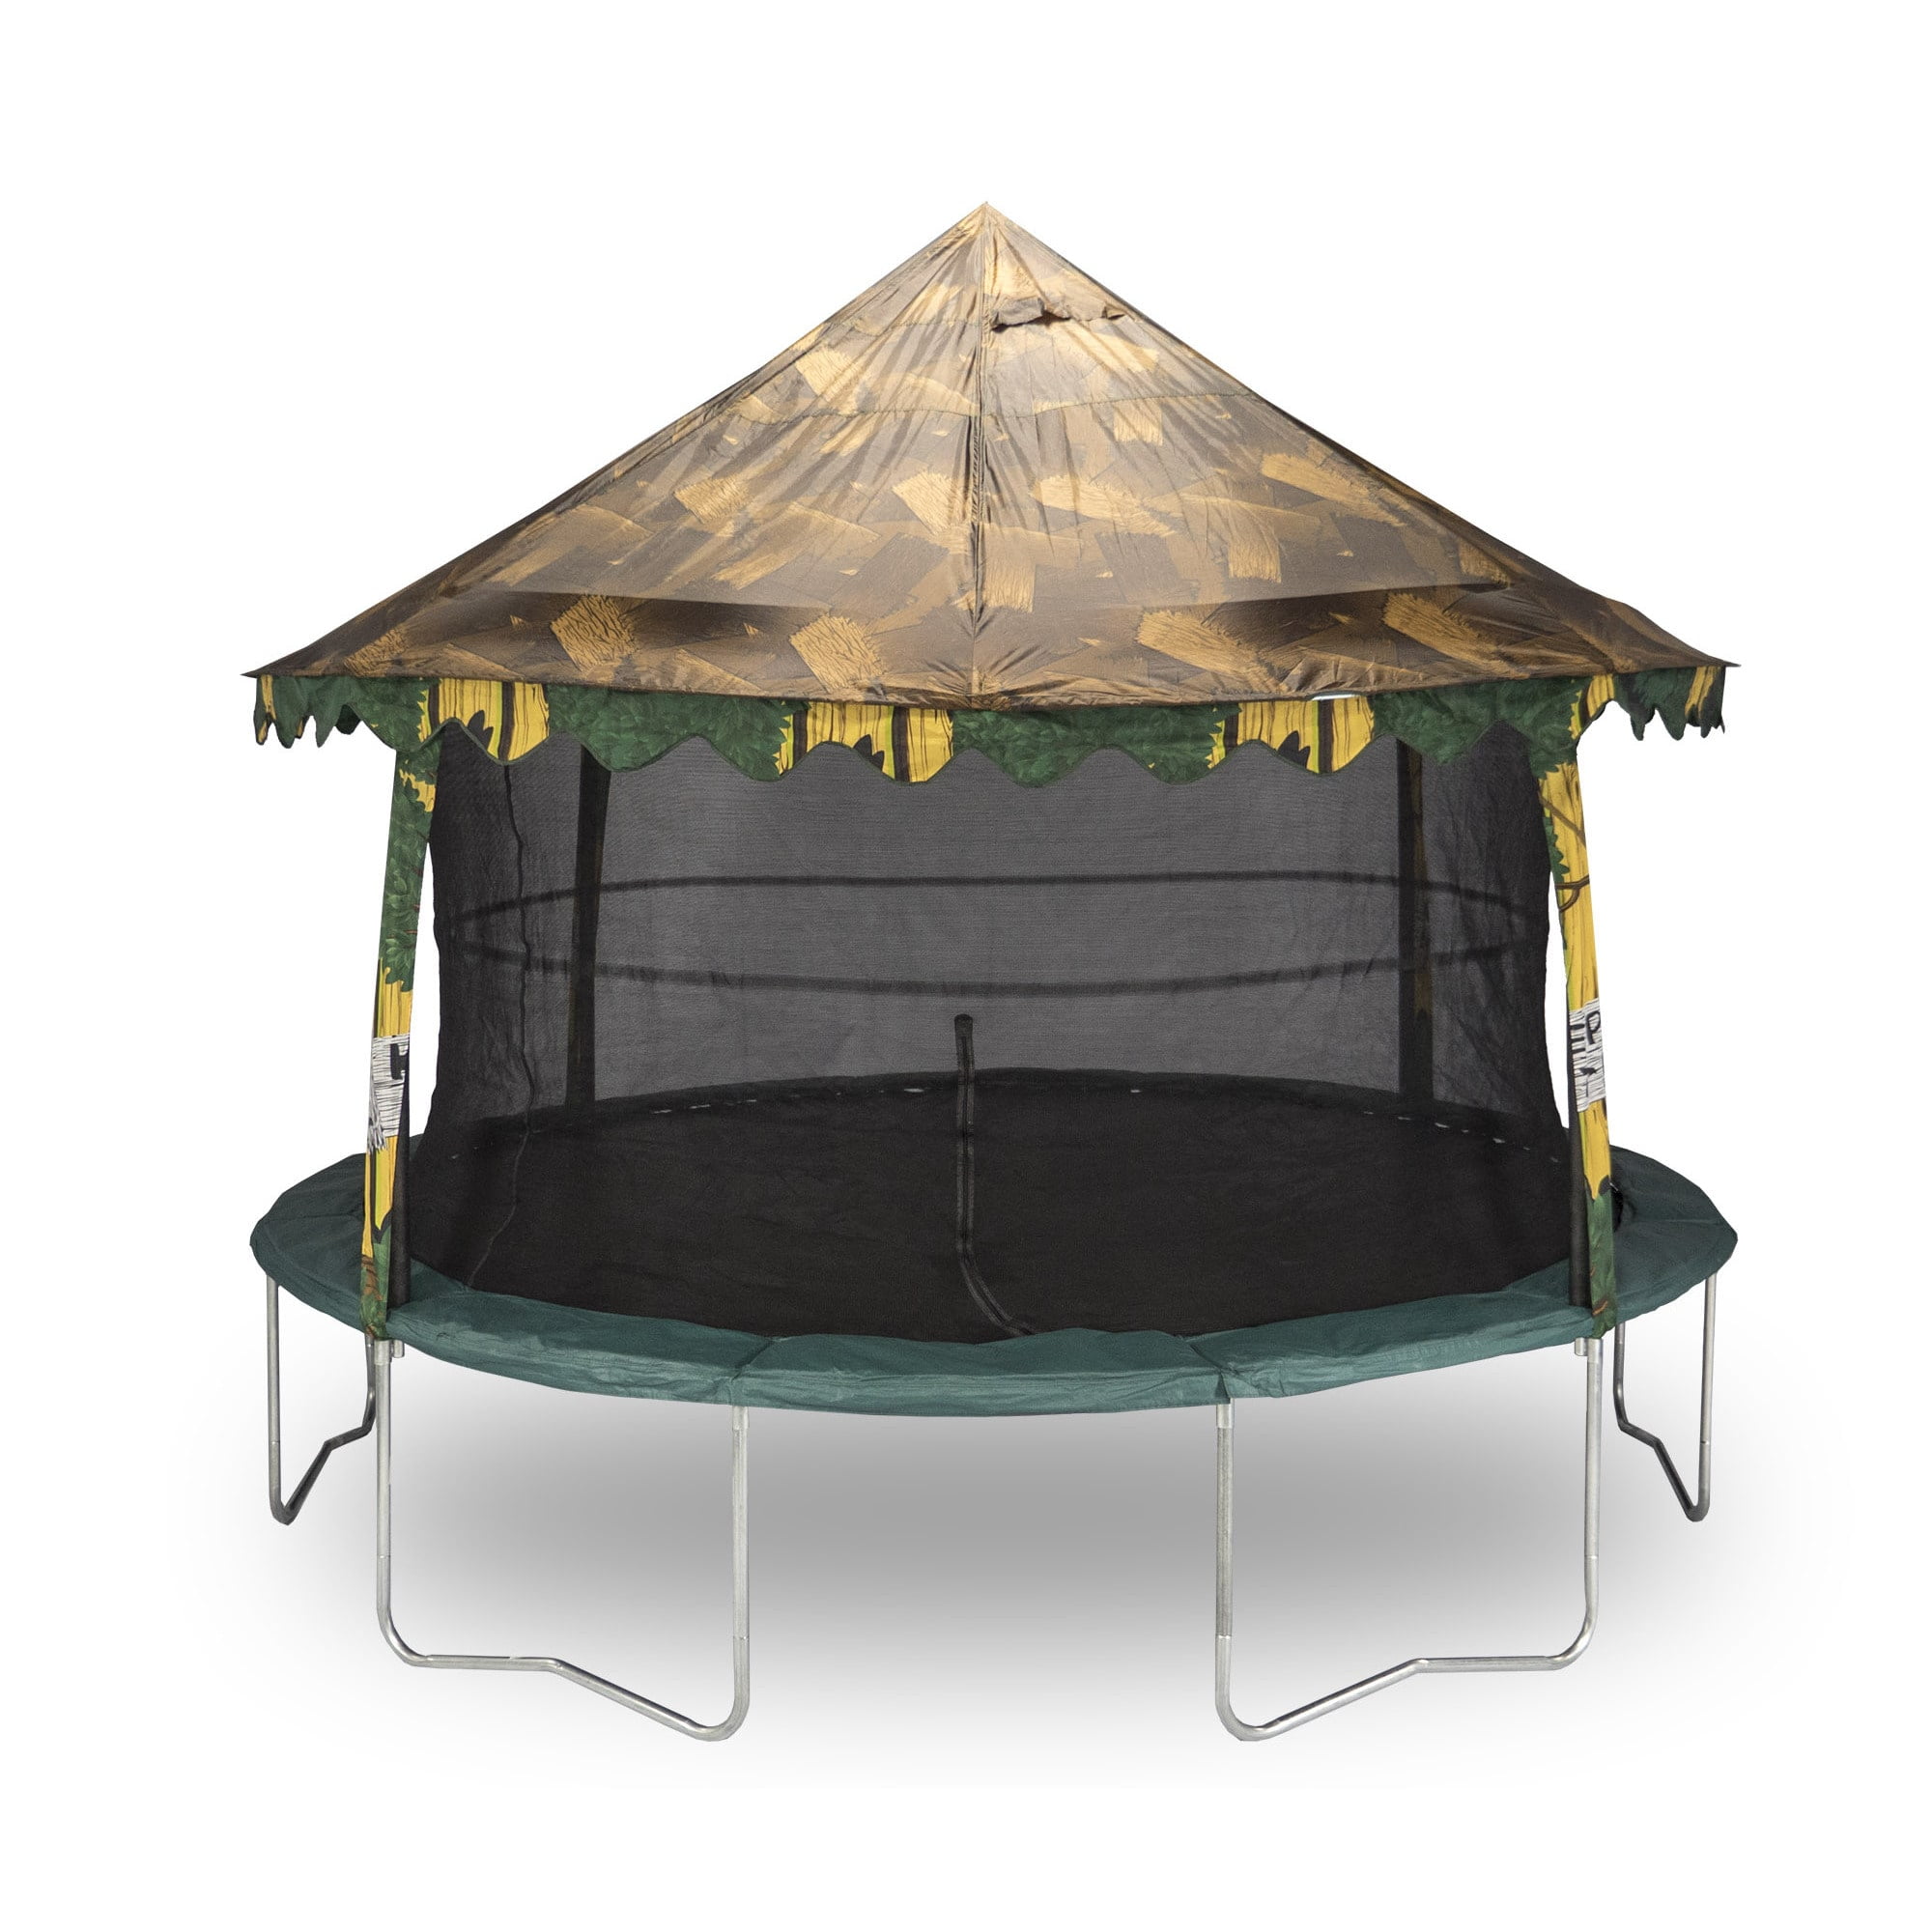 JumpKing House Canopy Cover Only) Walmart.com